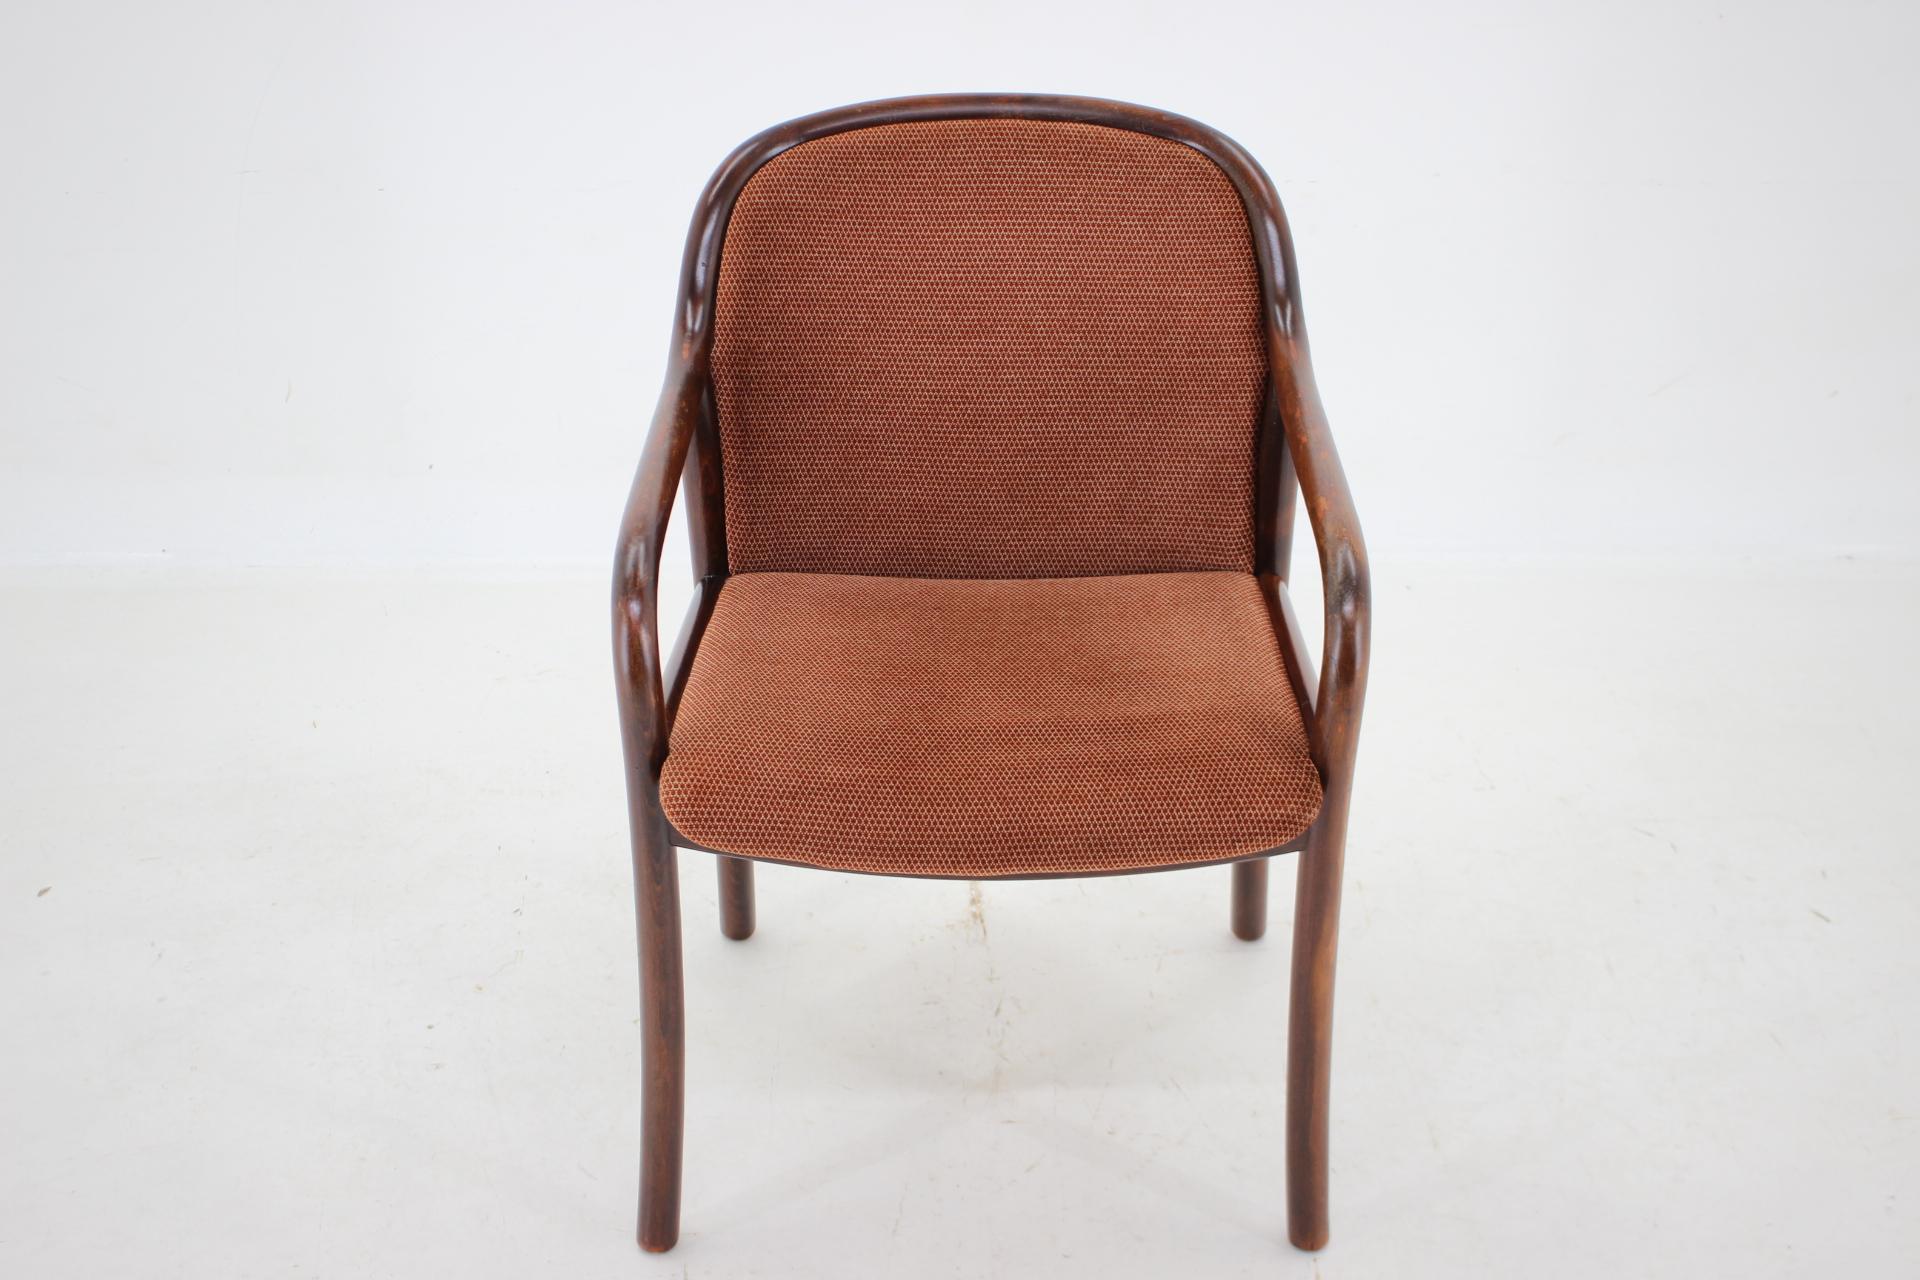 - good original condition with minor signs of use 
- height of seat 44 cm